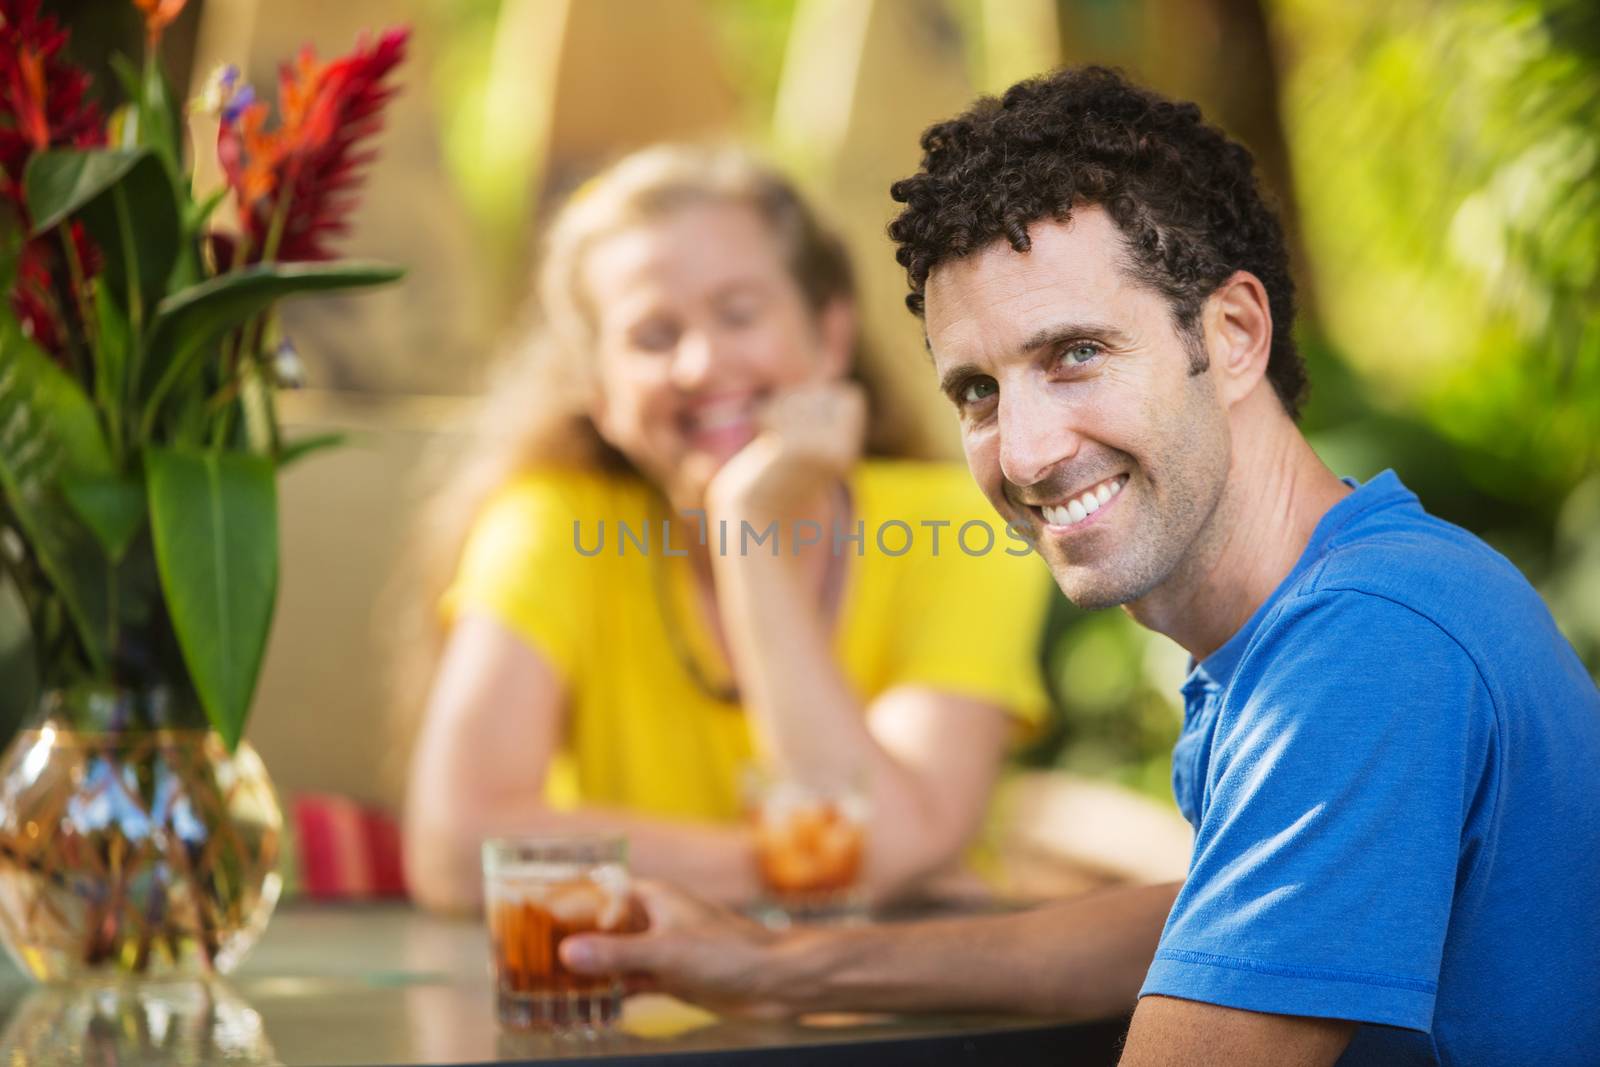 Smiling man having drinks with woman outdoors